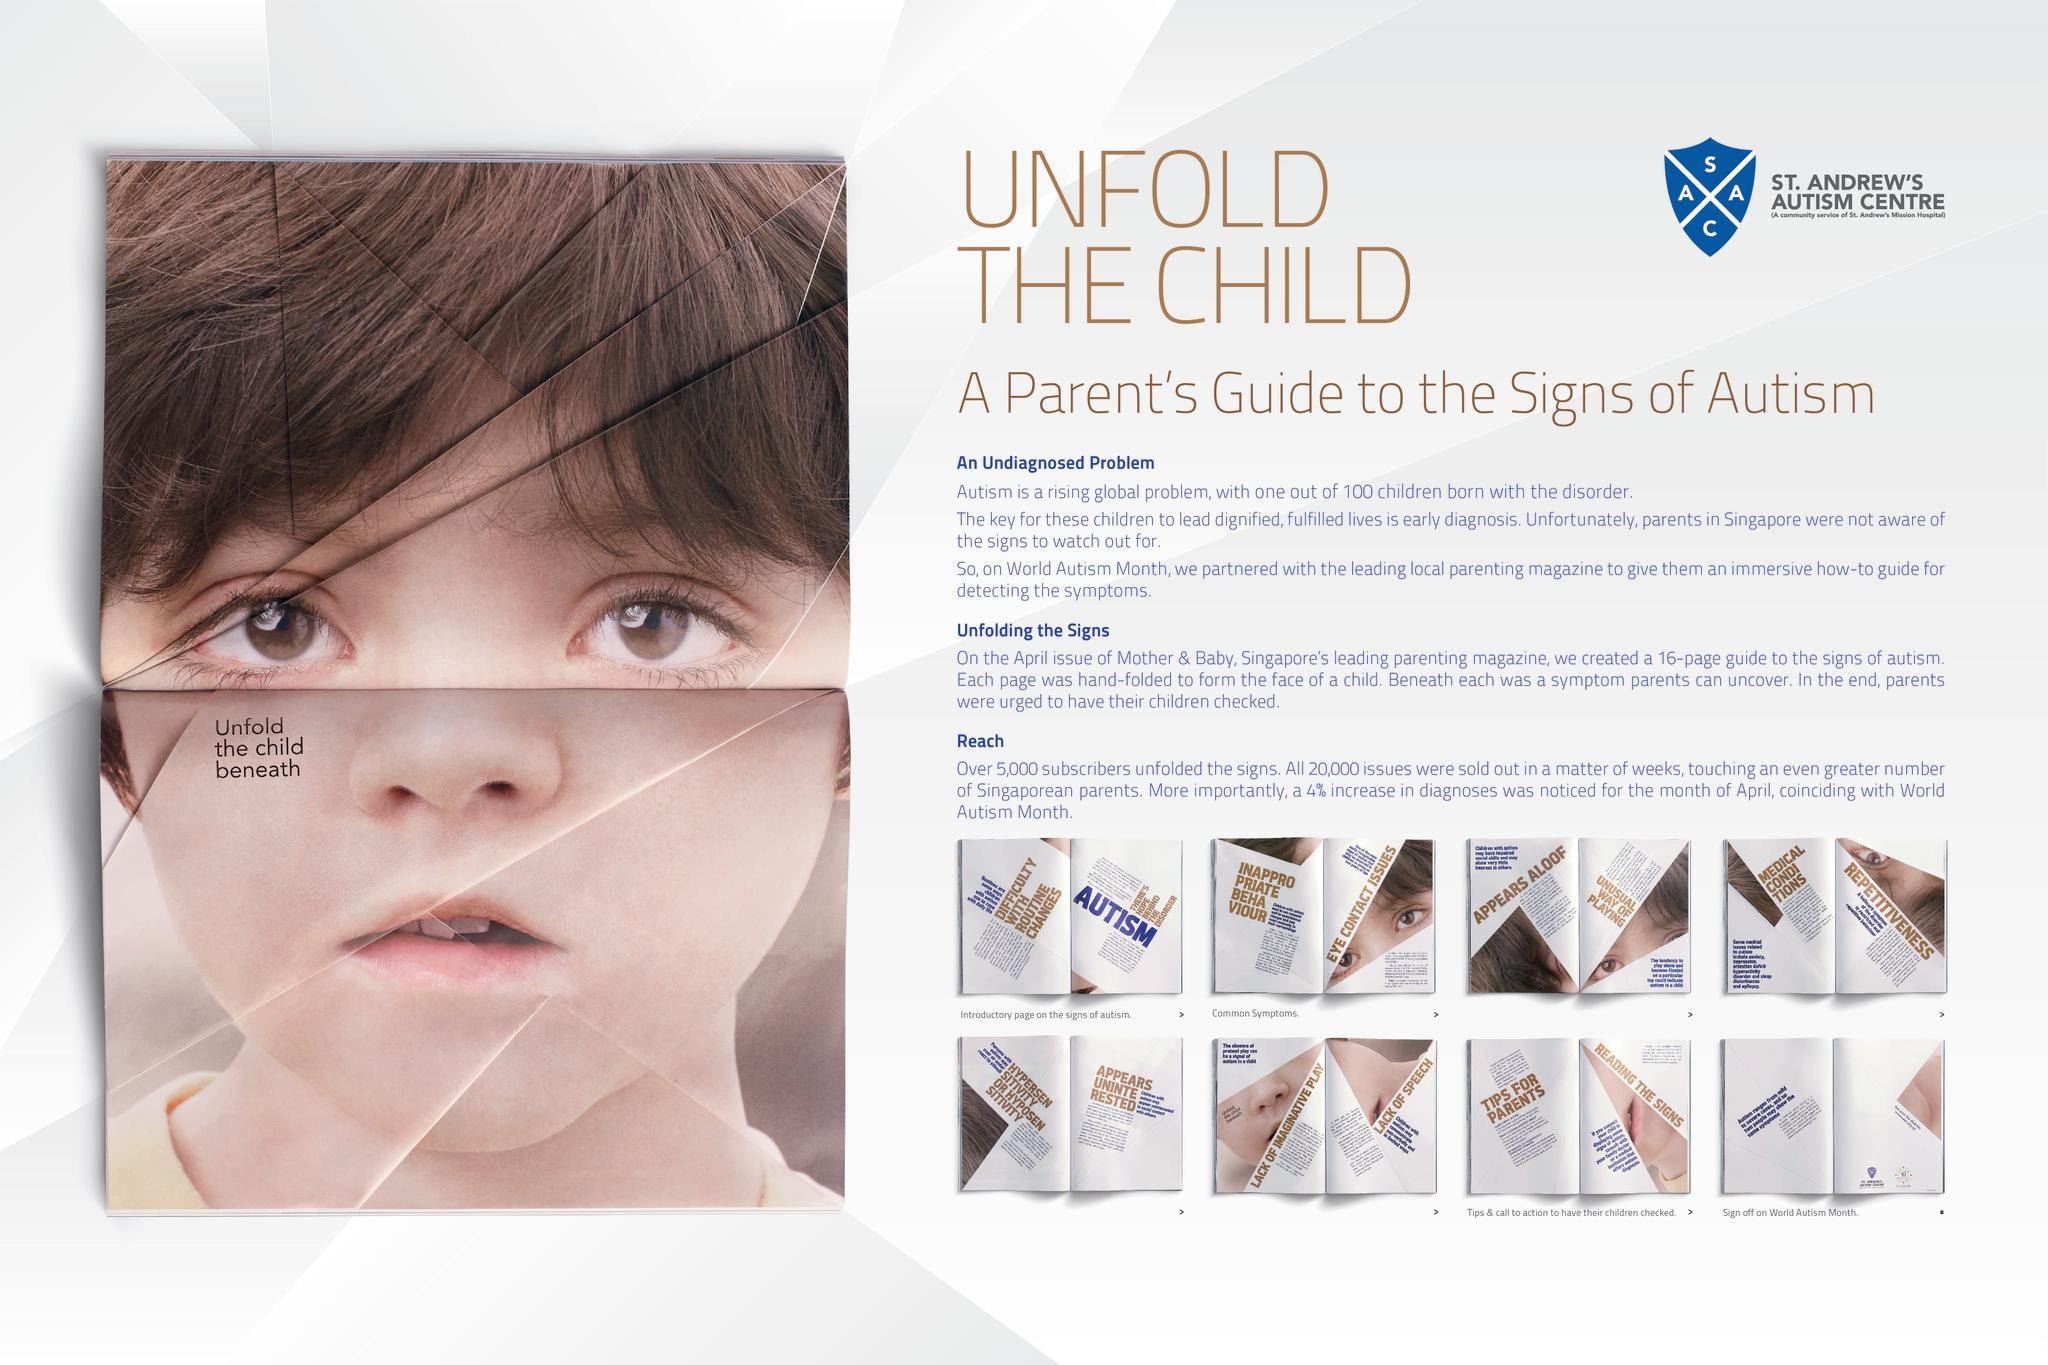 UNFOLD THE CHILD